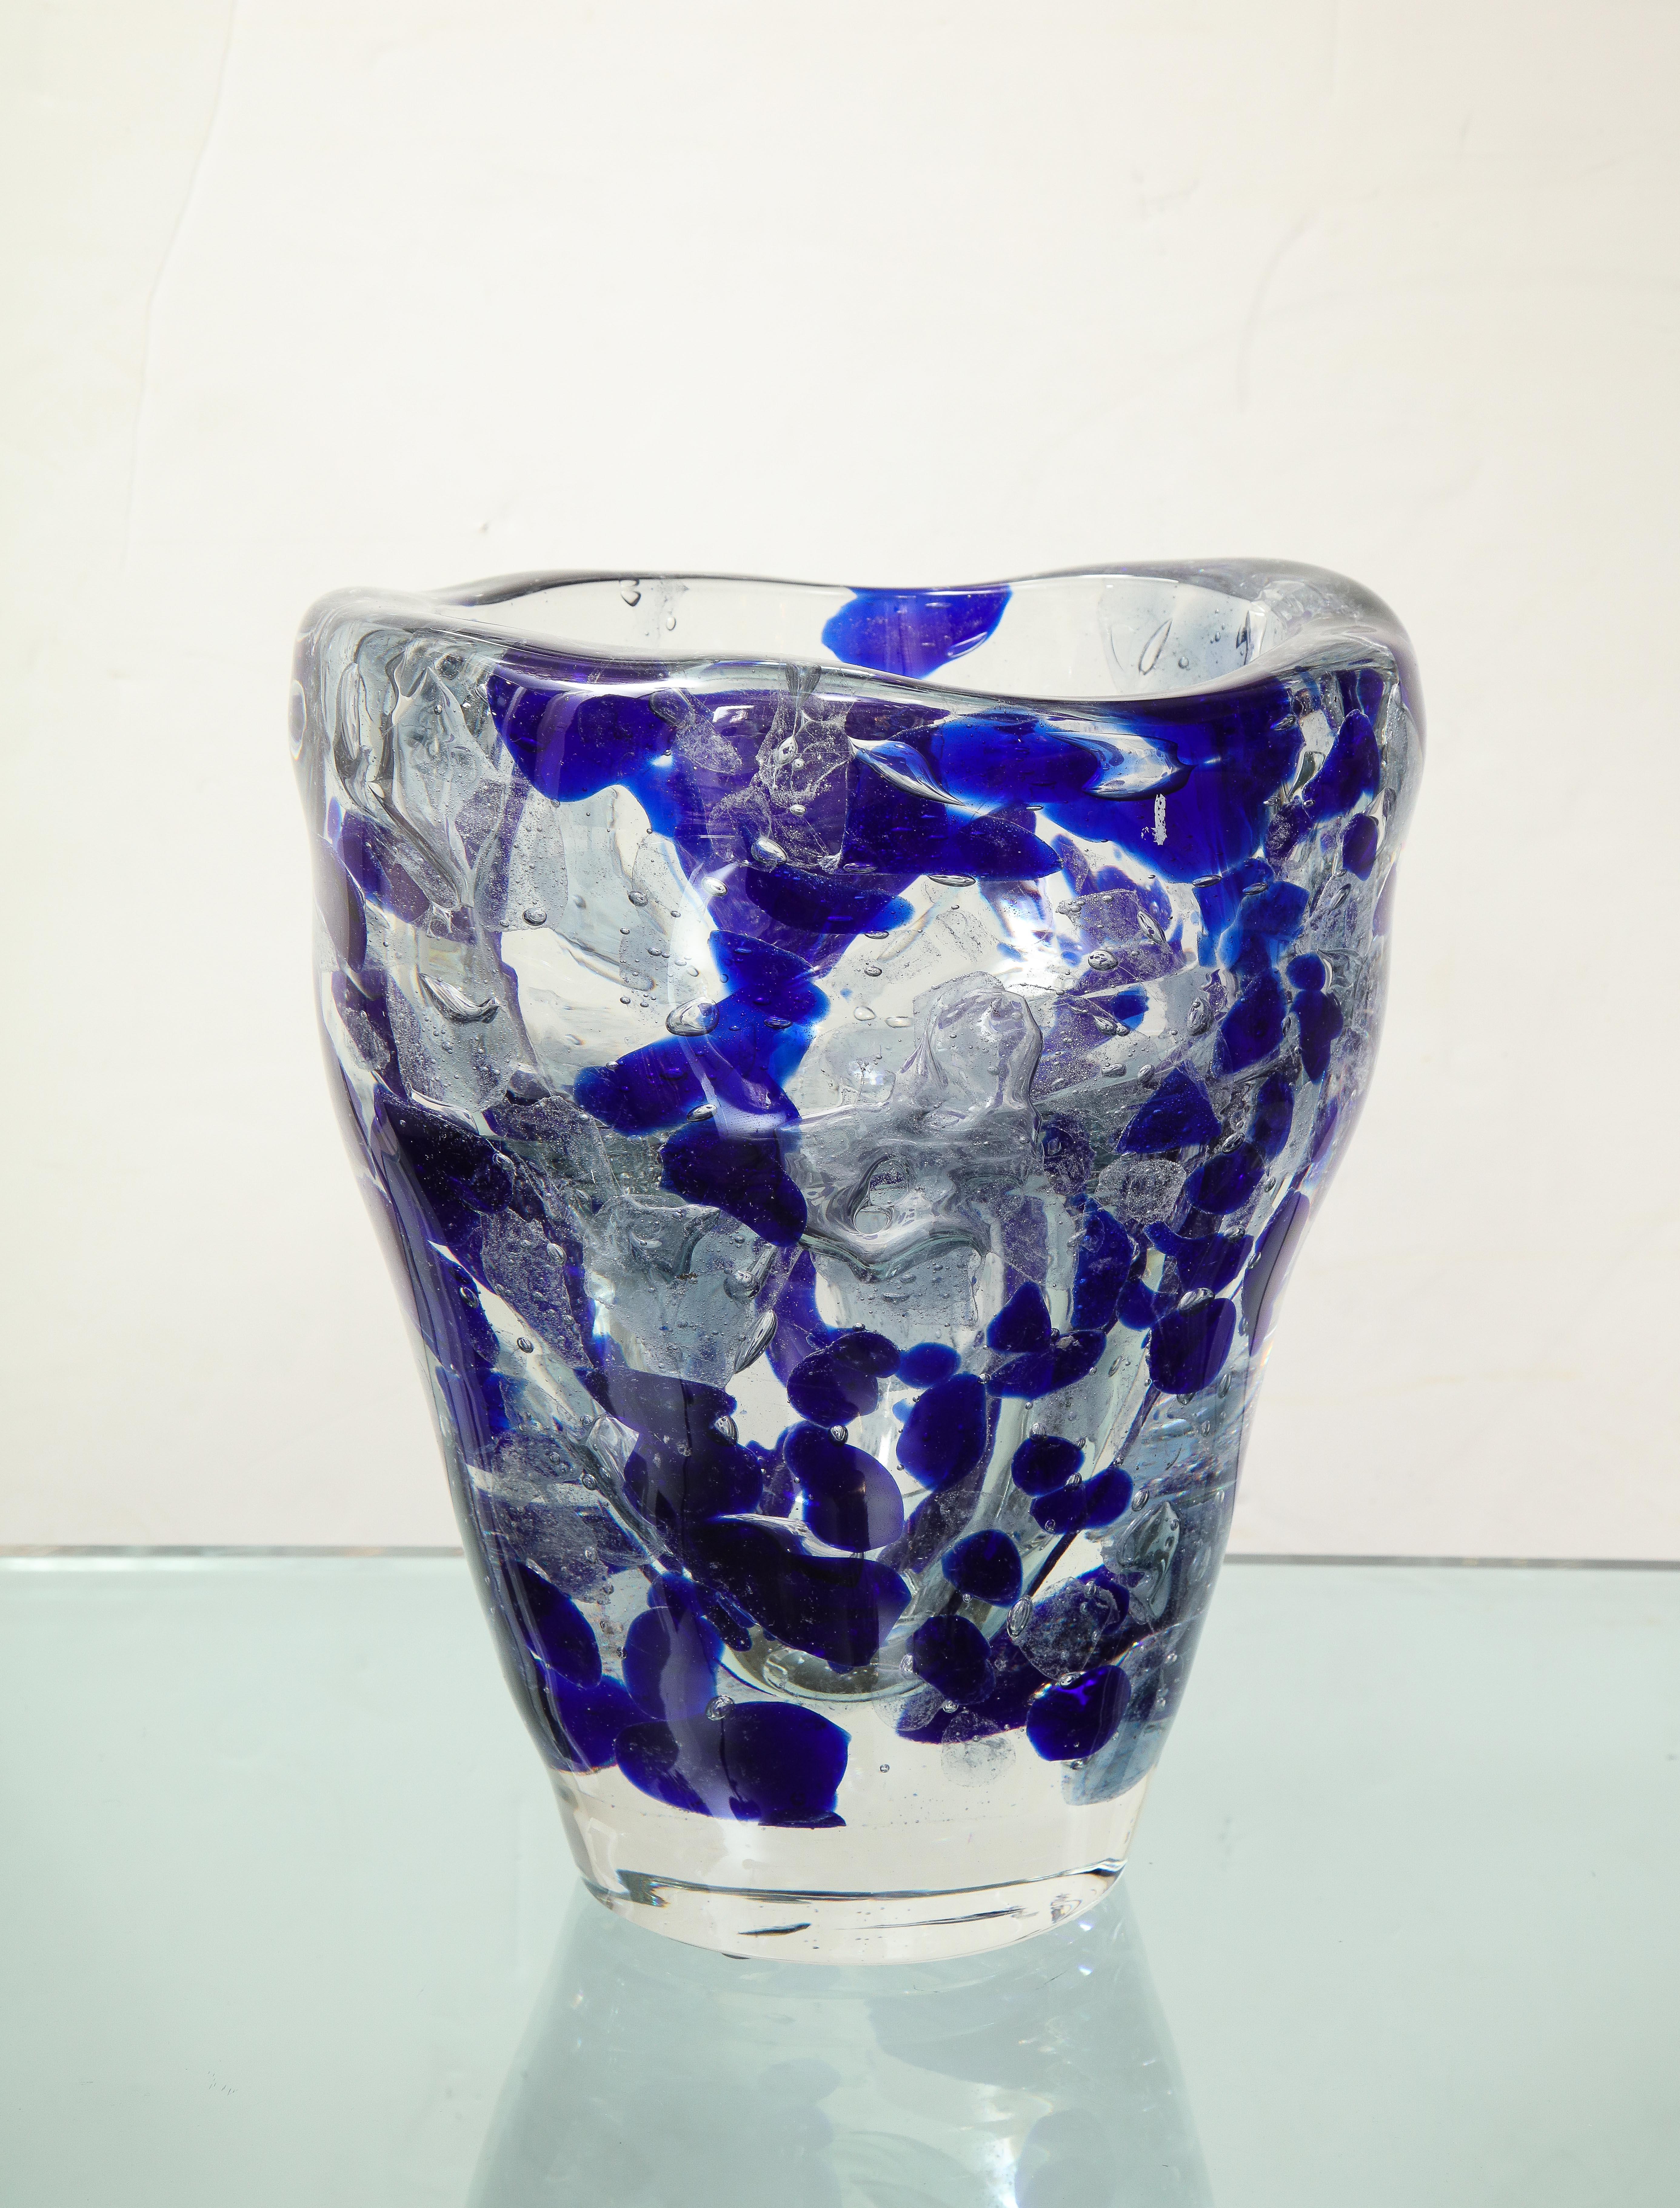 This Murano Glass Vase is available for immediate purchase. Custom orders are available in different colors.